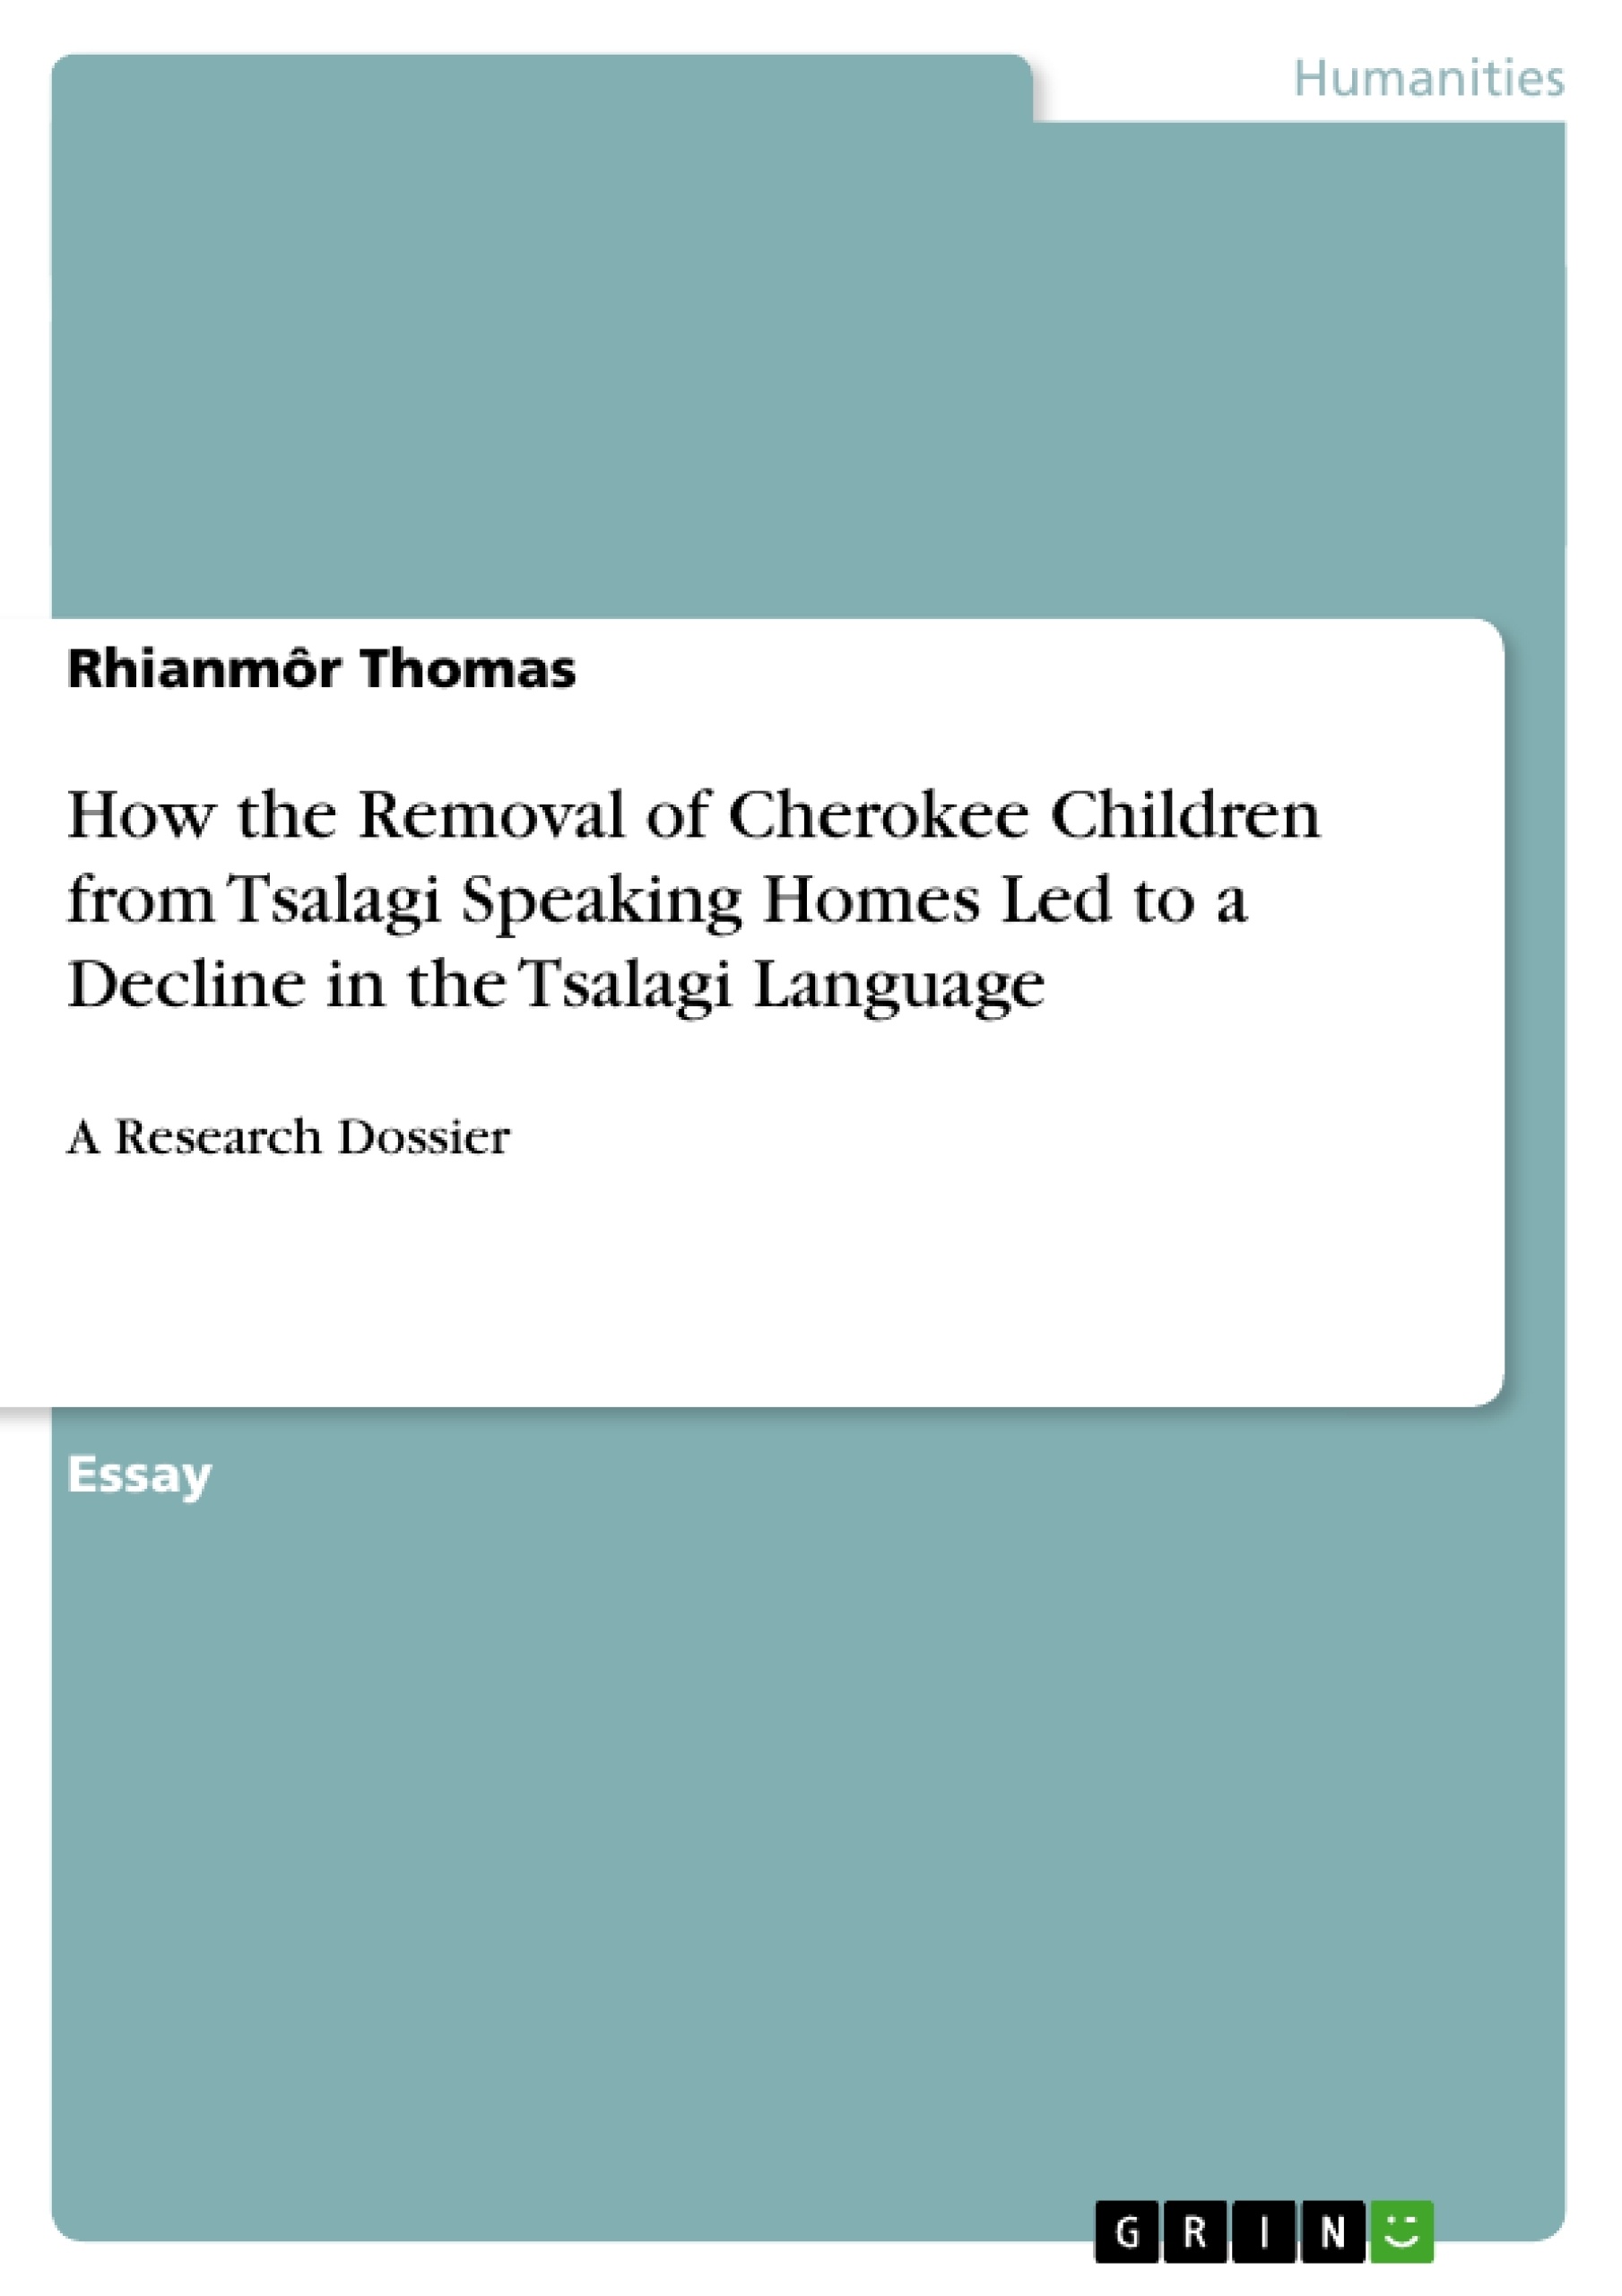 Titre: How the Removal of Cherokee Children from Tsalagi Speaking Homes Led to a Decline in the Tsalagi Language